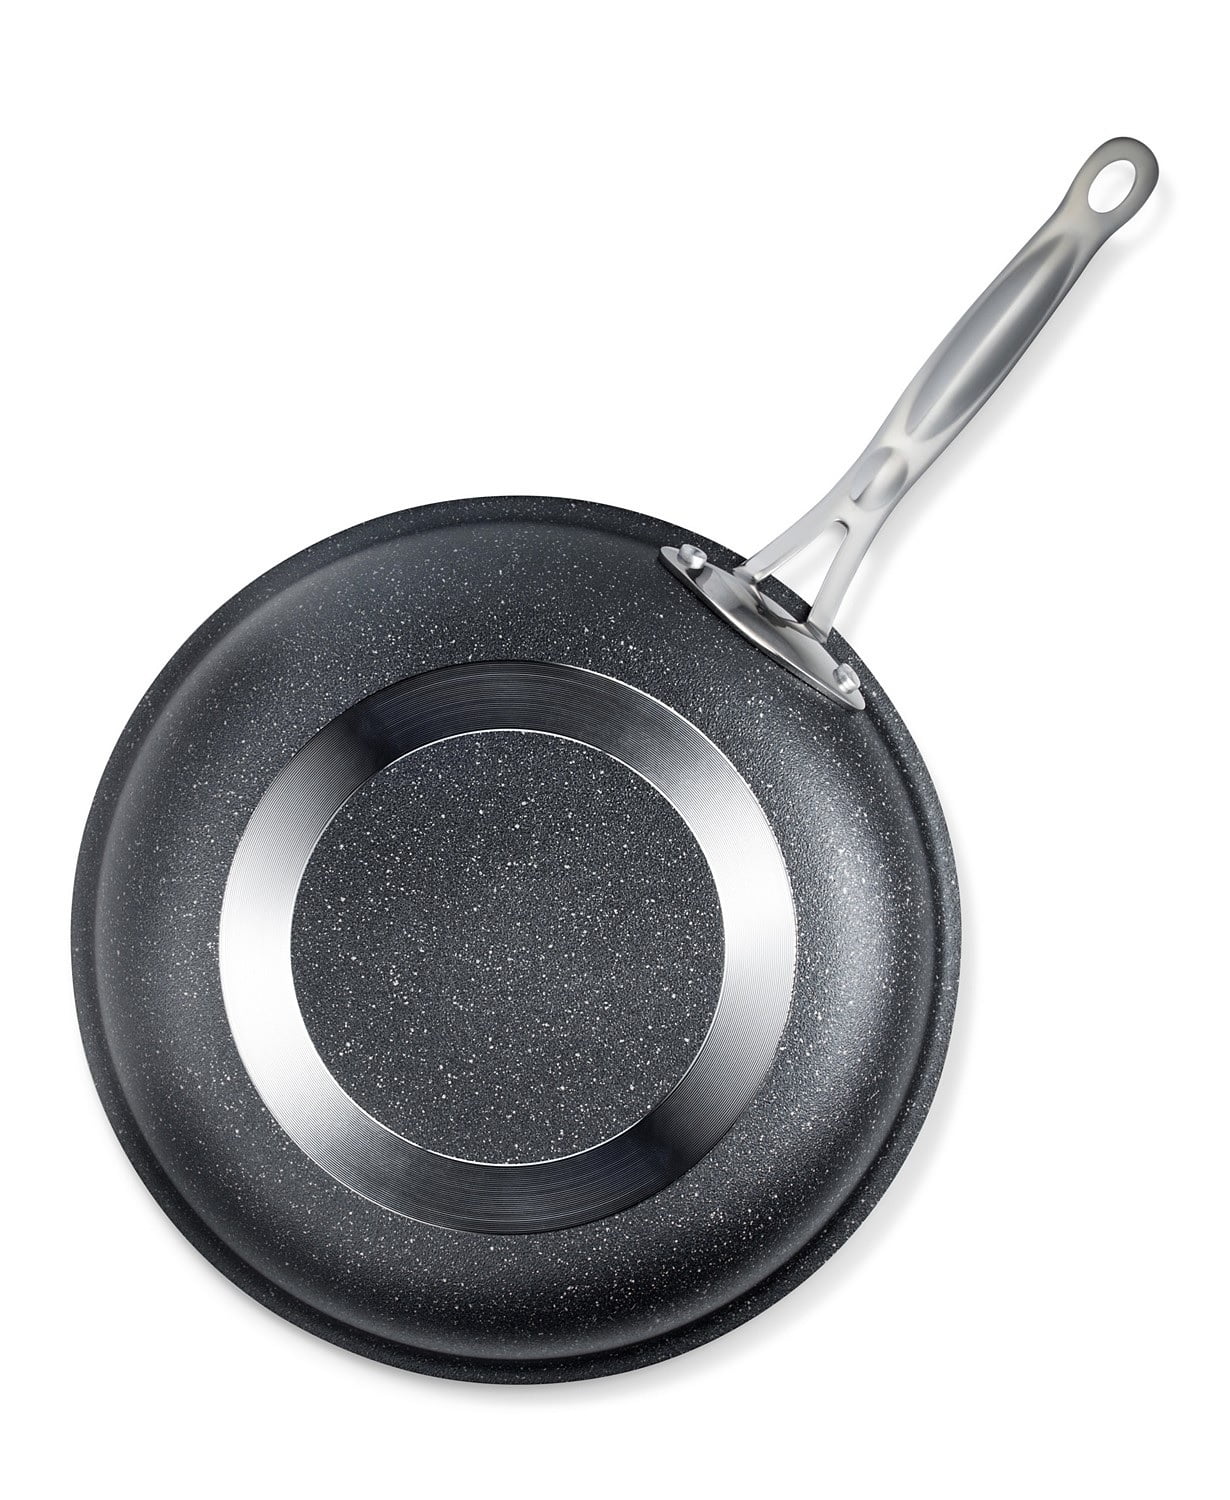 Granitestone 5.5'' and 9.5'' Nonstick Fry Pan Set with Stay Cool